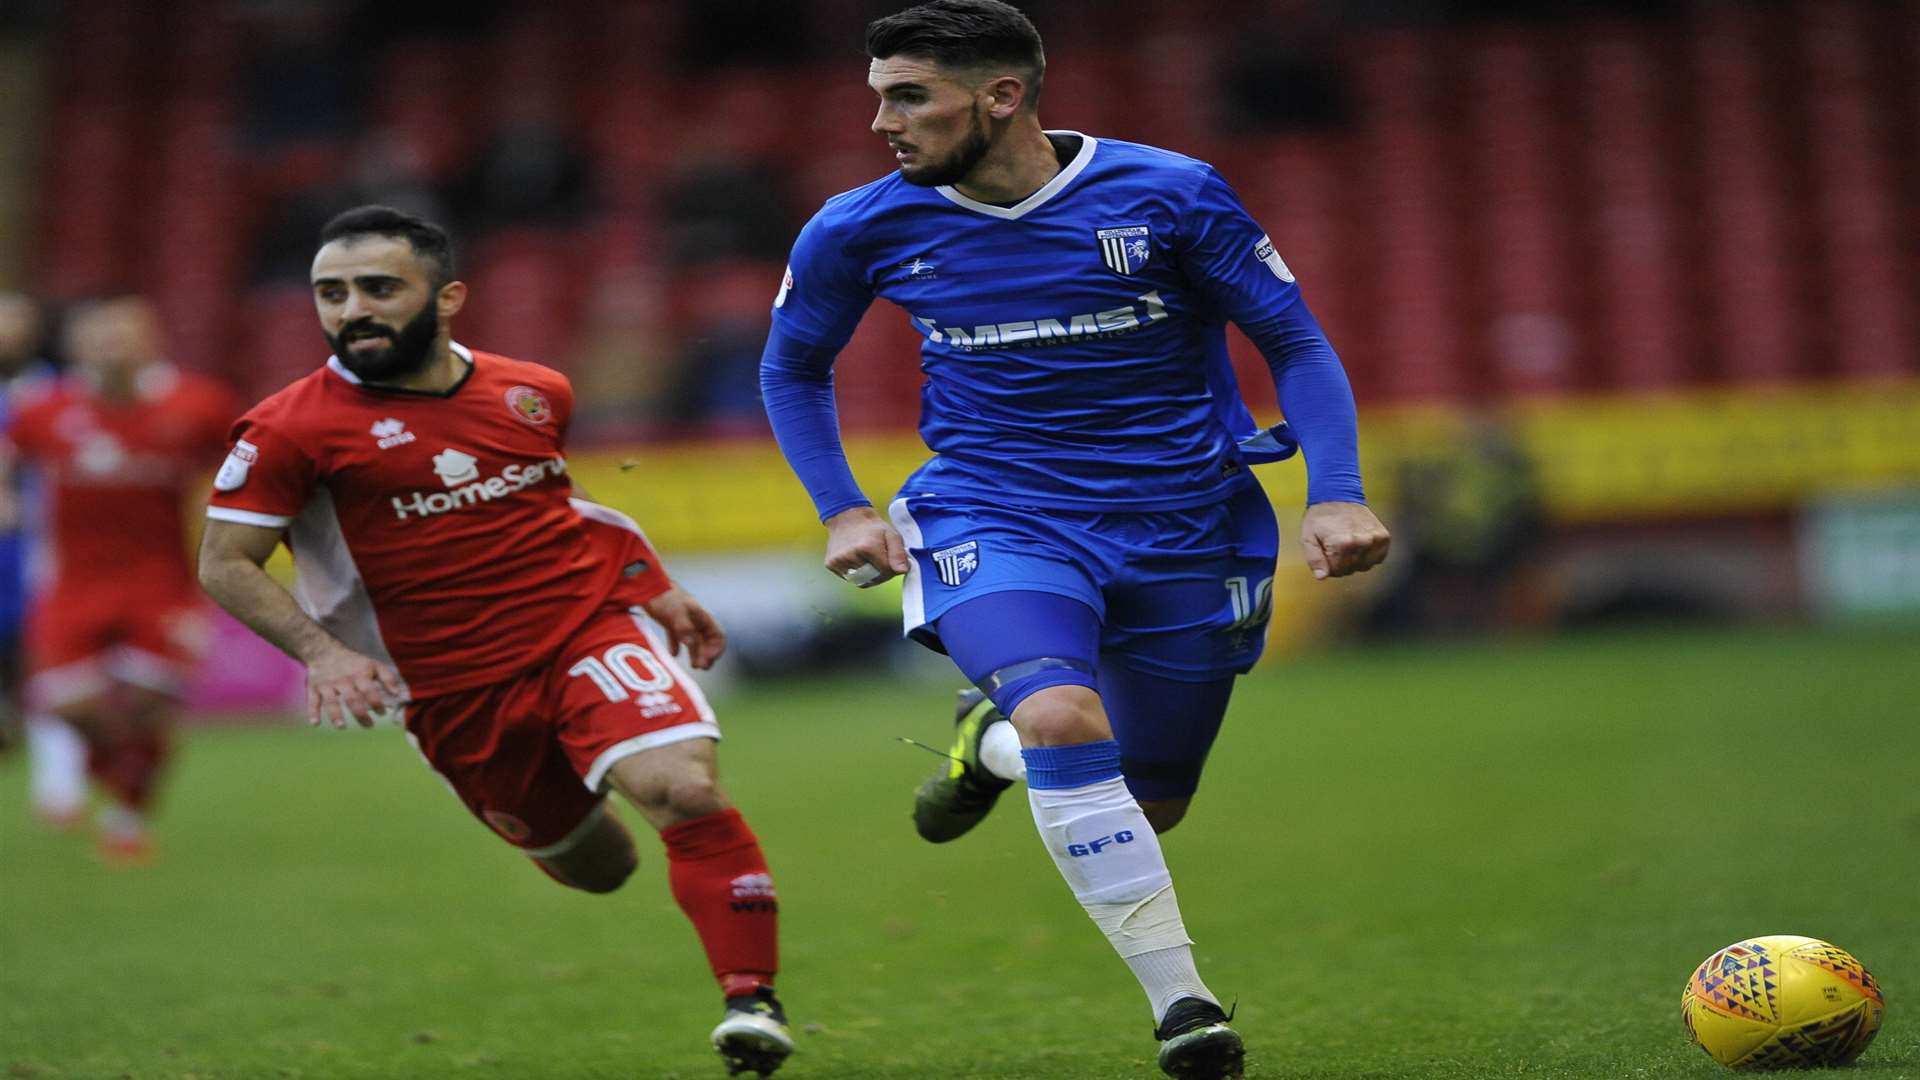 Conor Wilkinson pursued by Walsall's Erhun Oztumer Picture: Ady Kerry